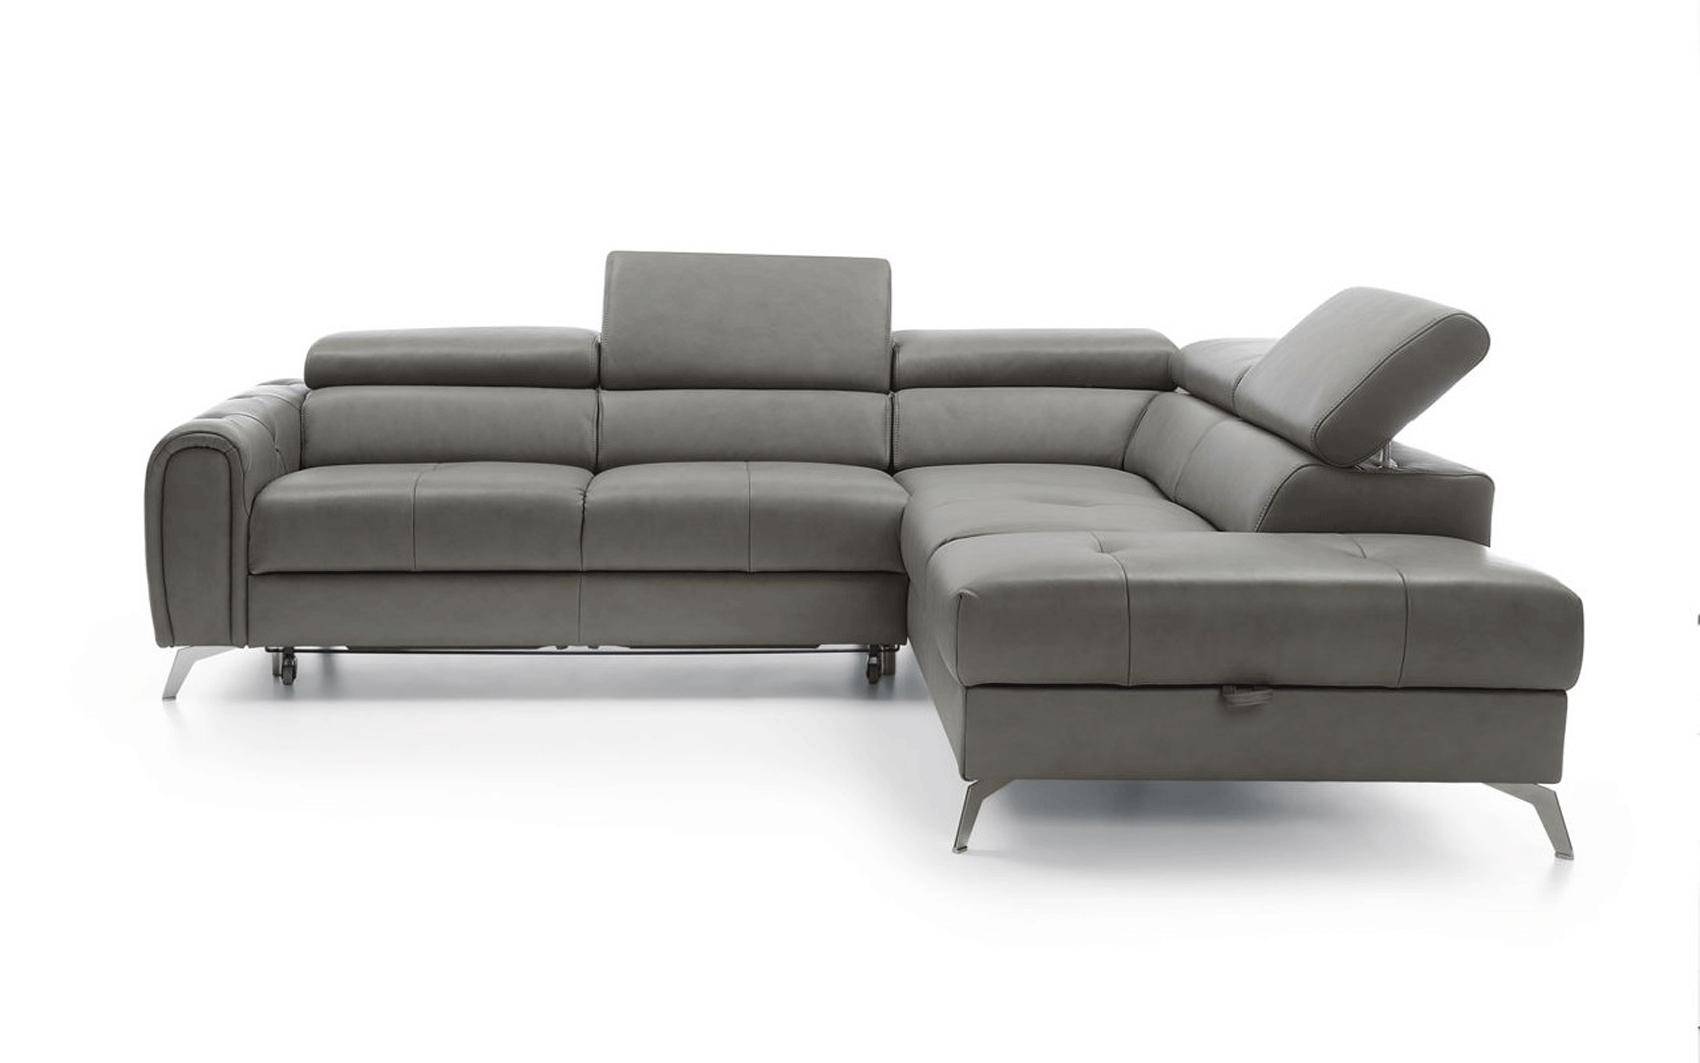 Esf Camelia Sectional Sofa Bed, Leather Sectional Sofa Bed With Storage